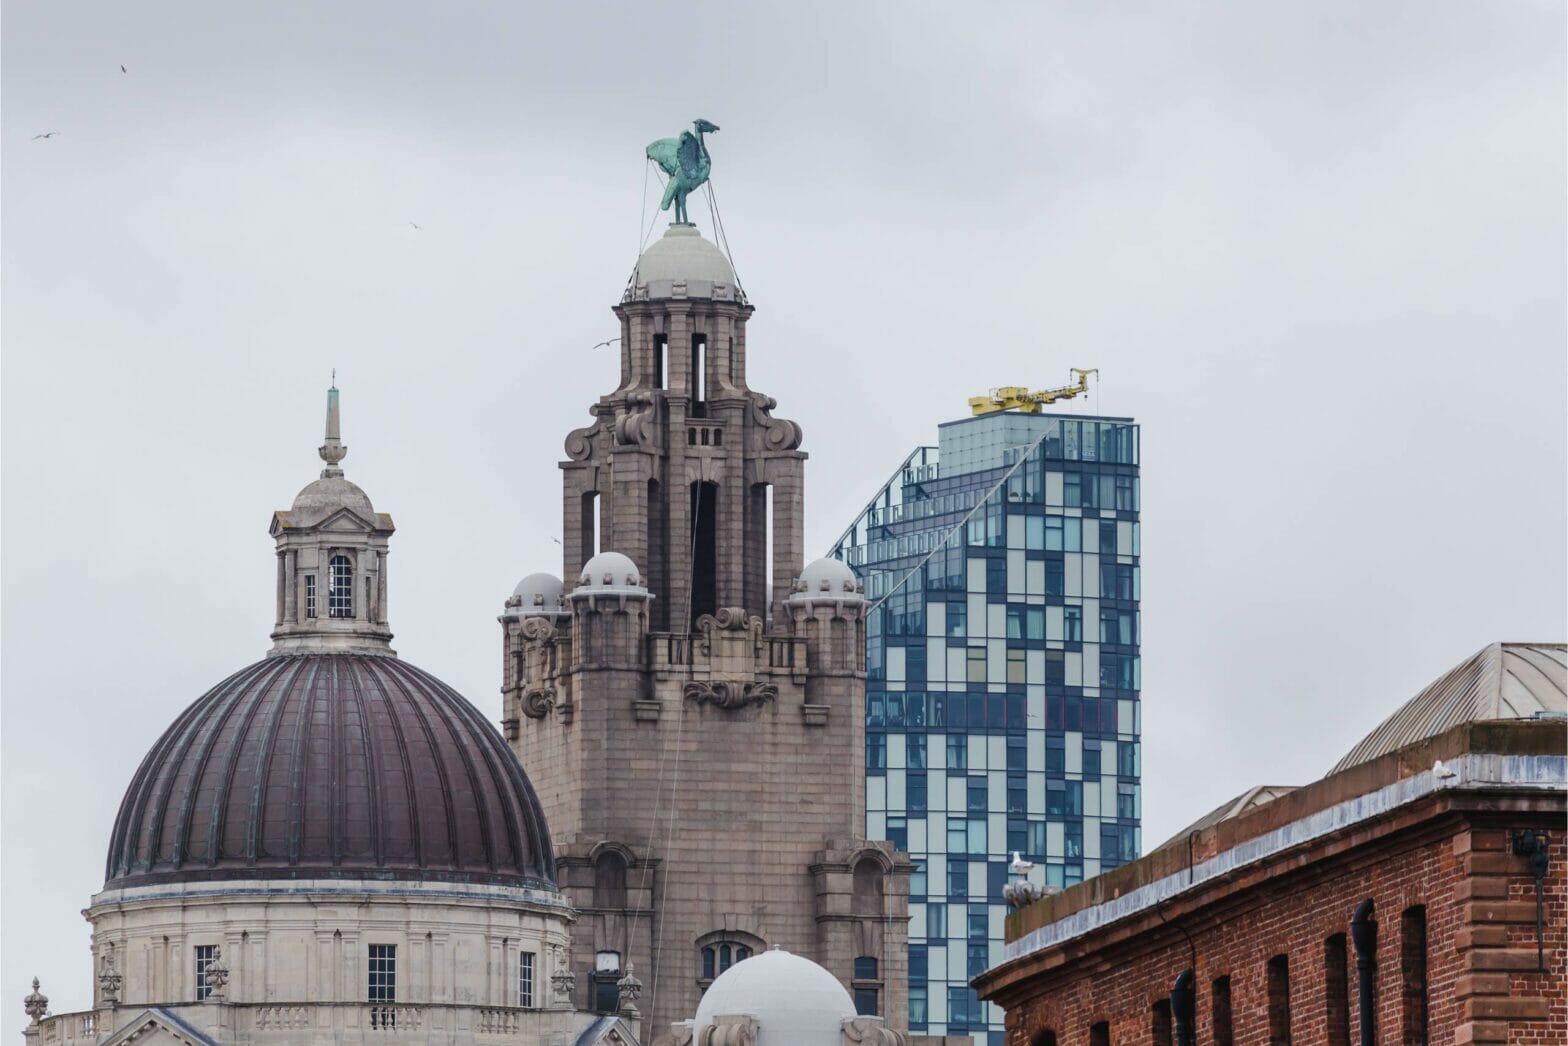 Panoramic Photo of Liverpool Unity Building, protected by Hyfire Taurus Wireless Fire System